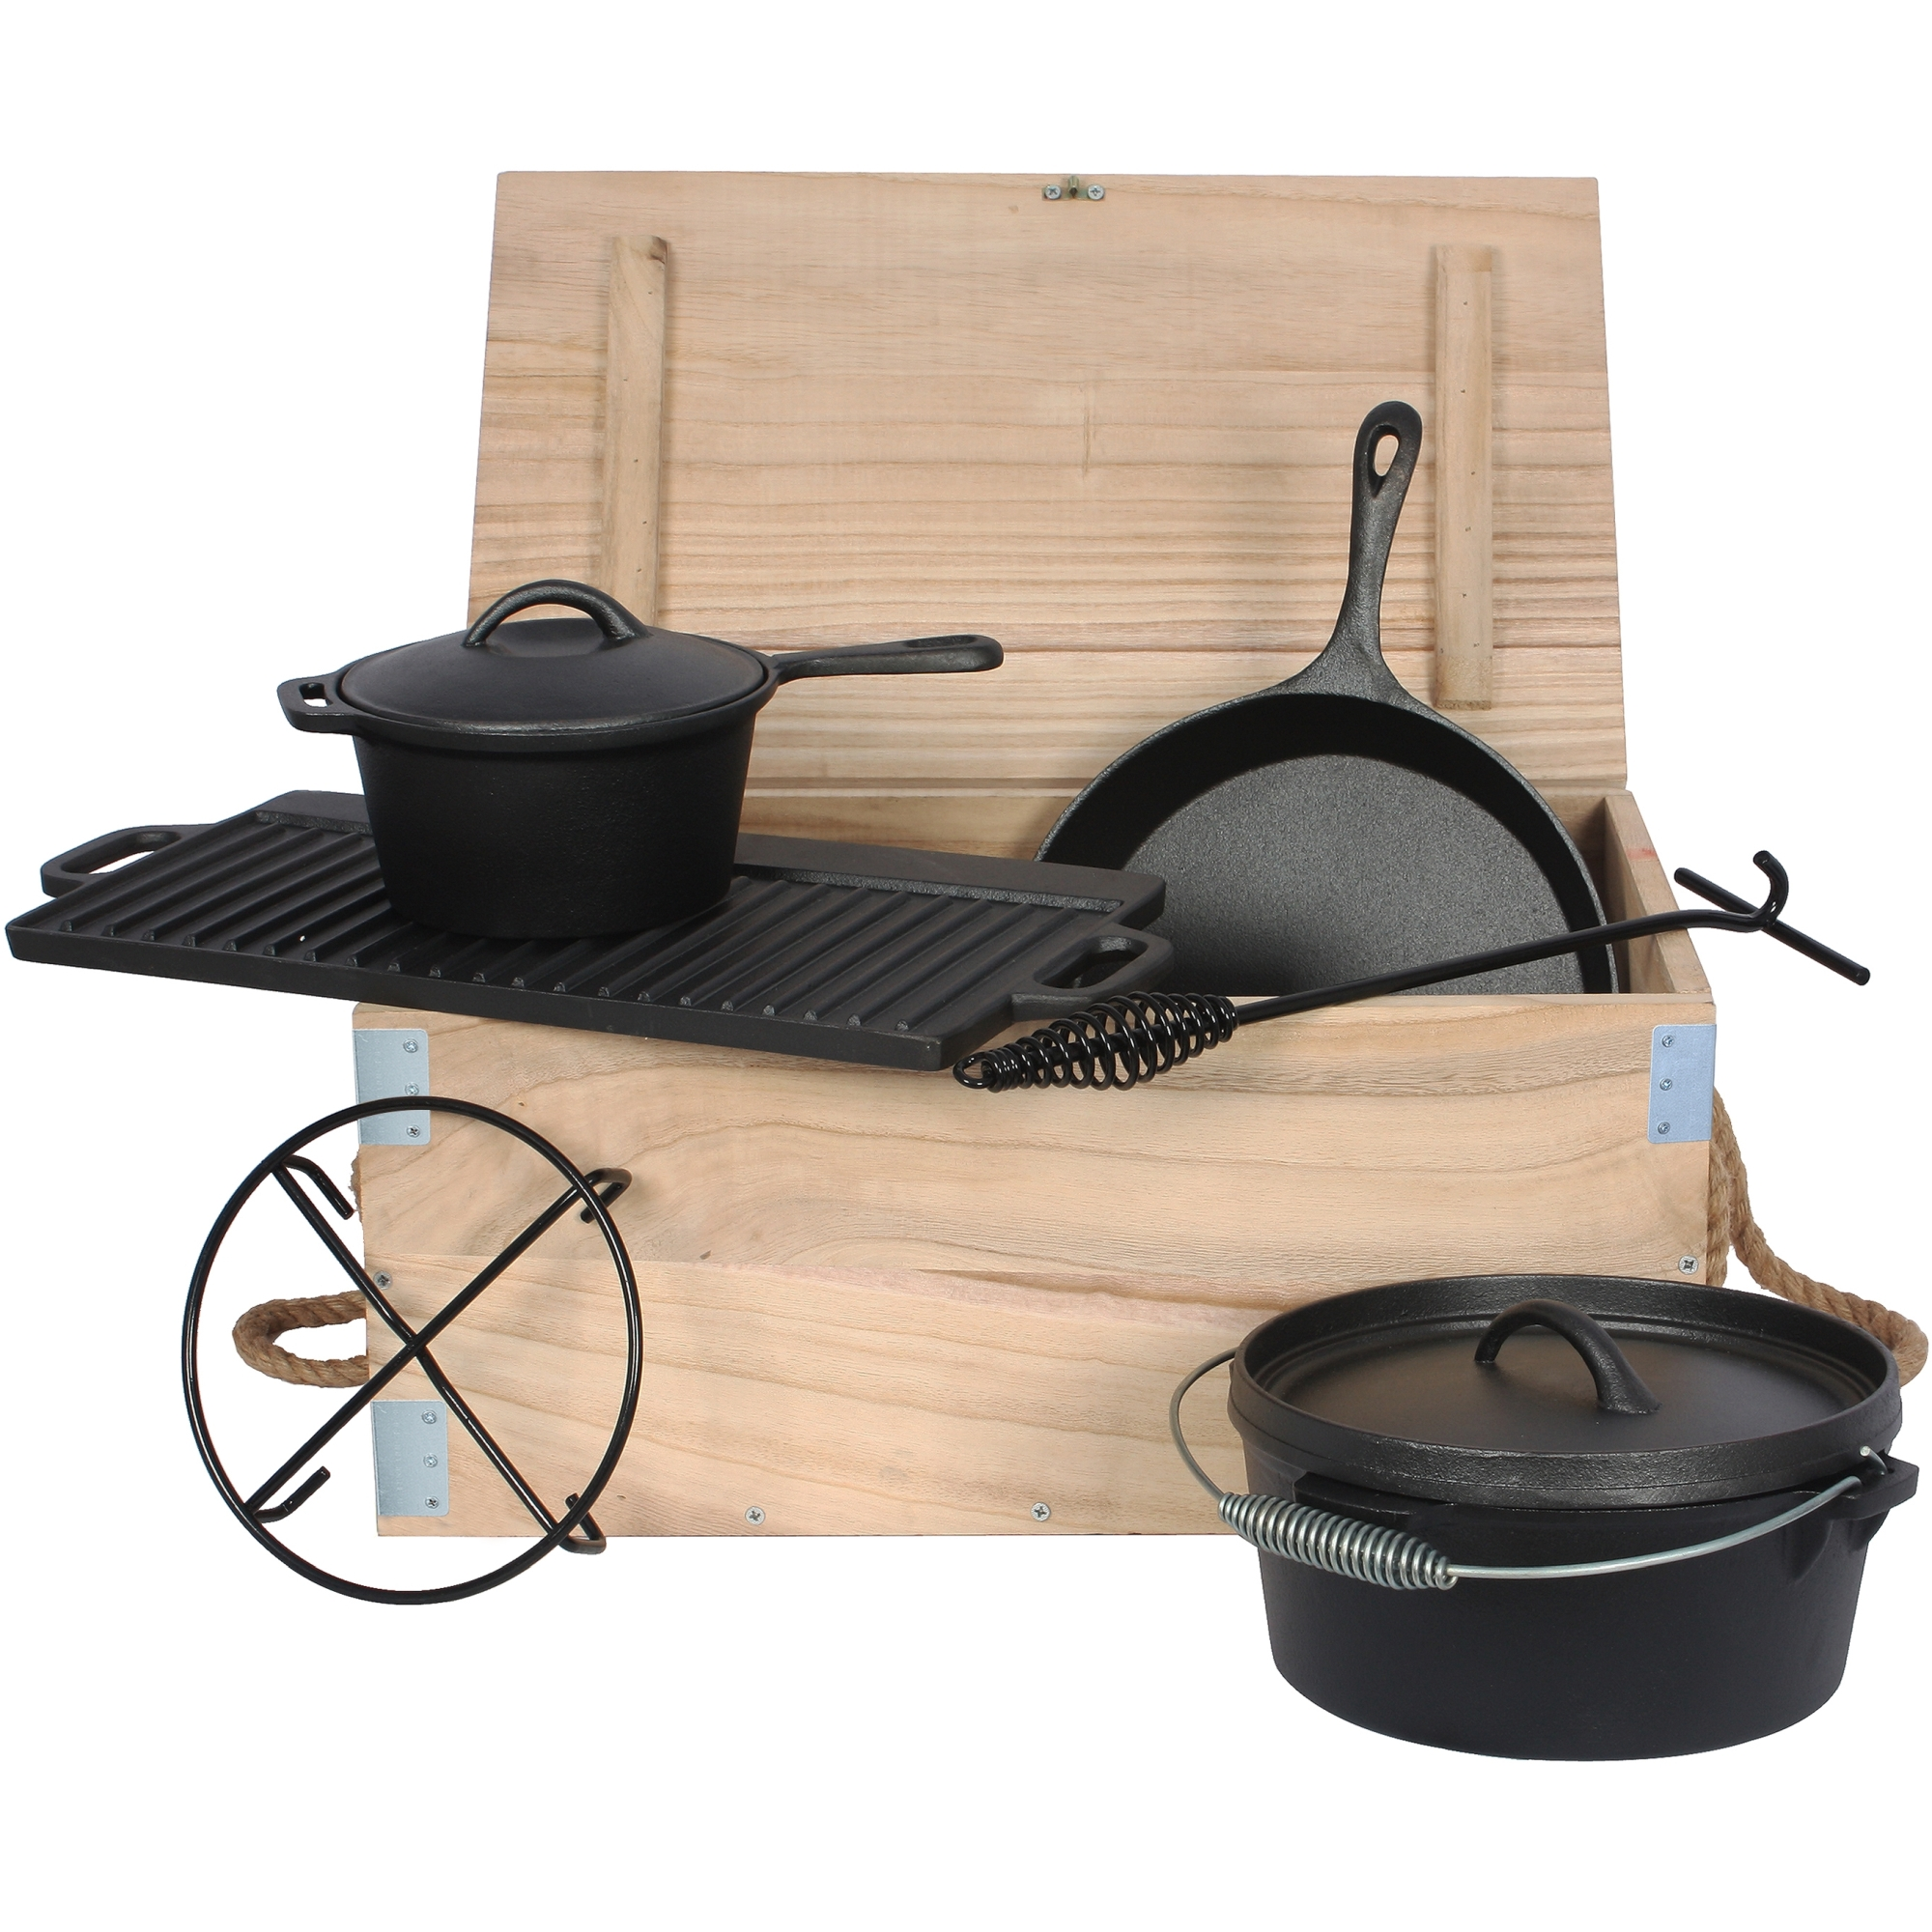 Dutch-Oven-Set Gusseisen 7-teilig + product picture